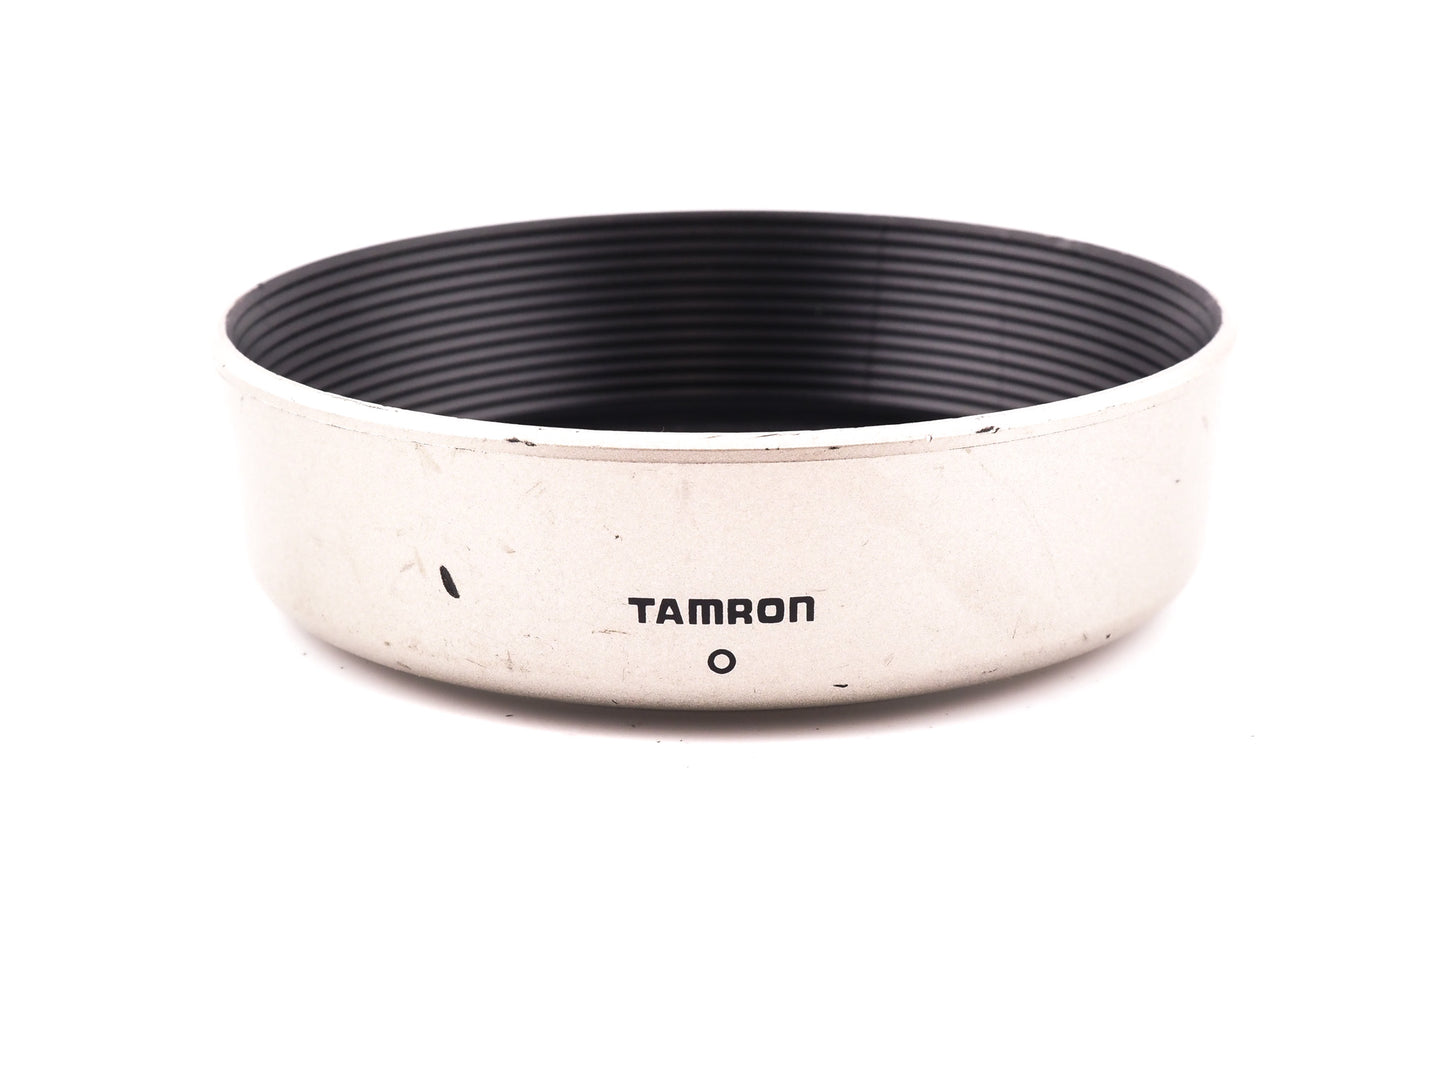 Tamron 2C2FH Lens Hood for 28-80mm f3.5-5.6 - Accessory